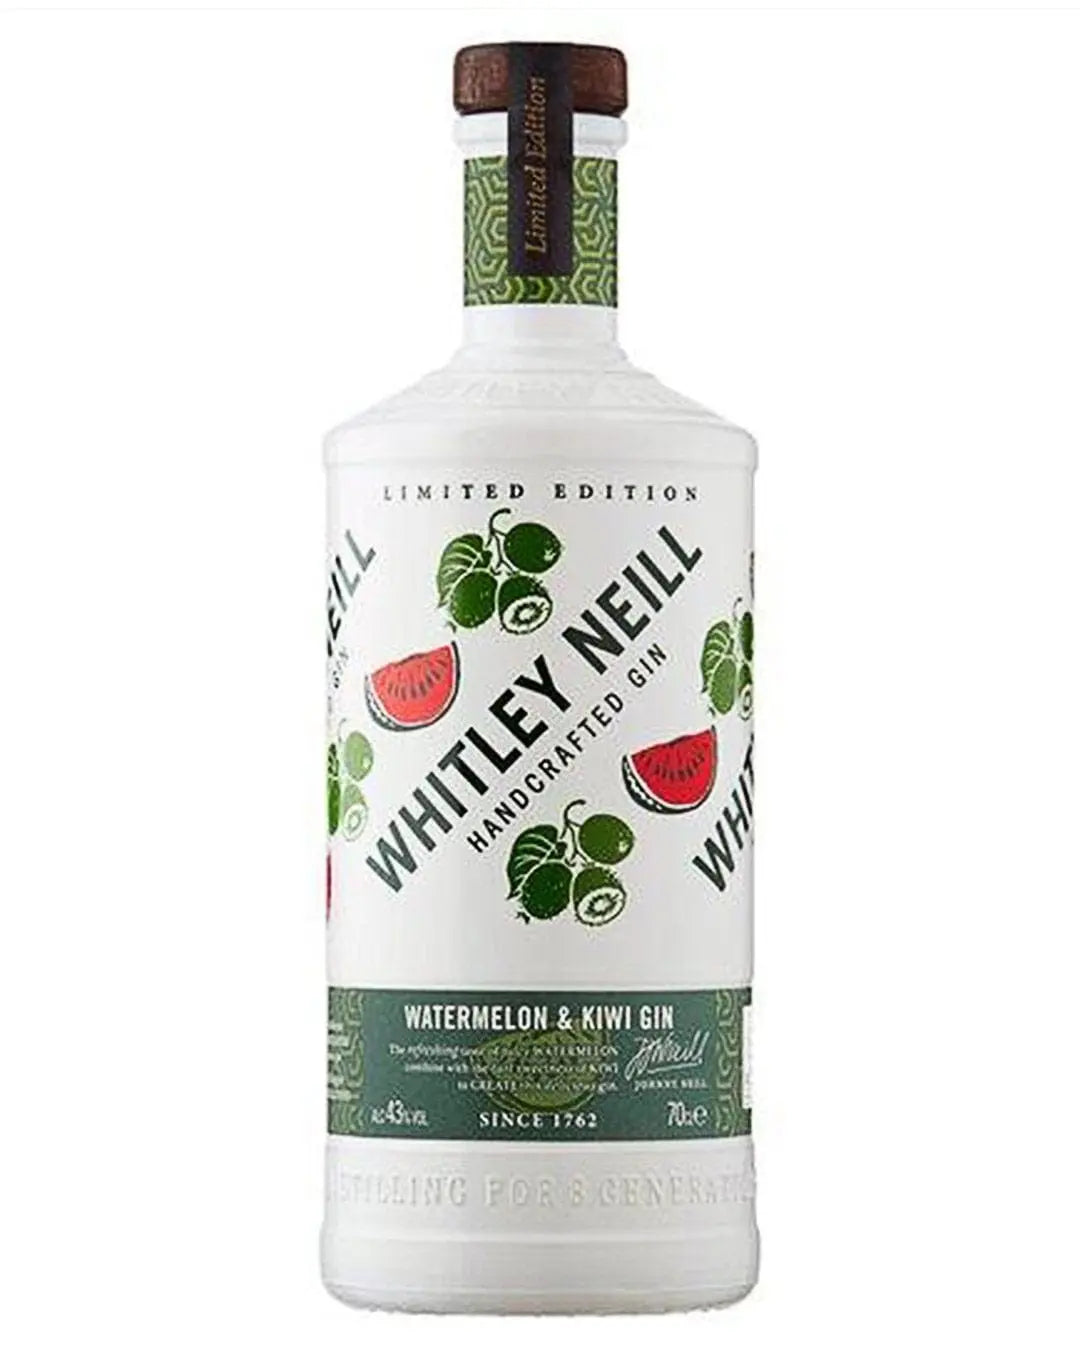 Whitley Neill Limited Edition Watermelon & Kiwi Gin, 70 cl Gin 5011166063629